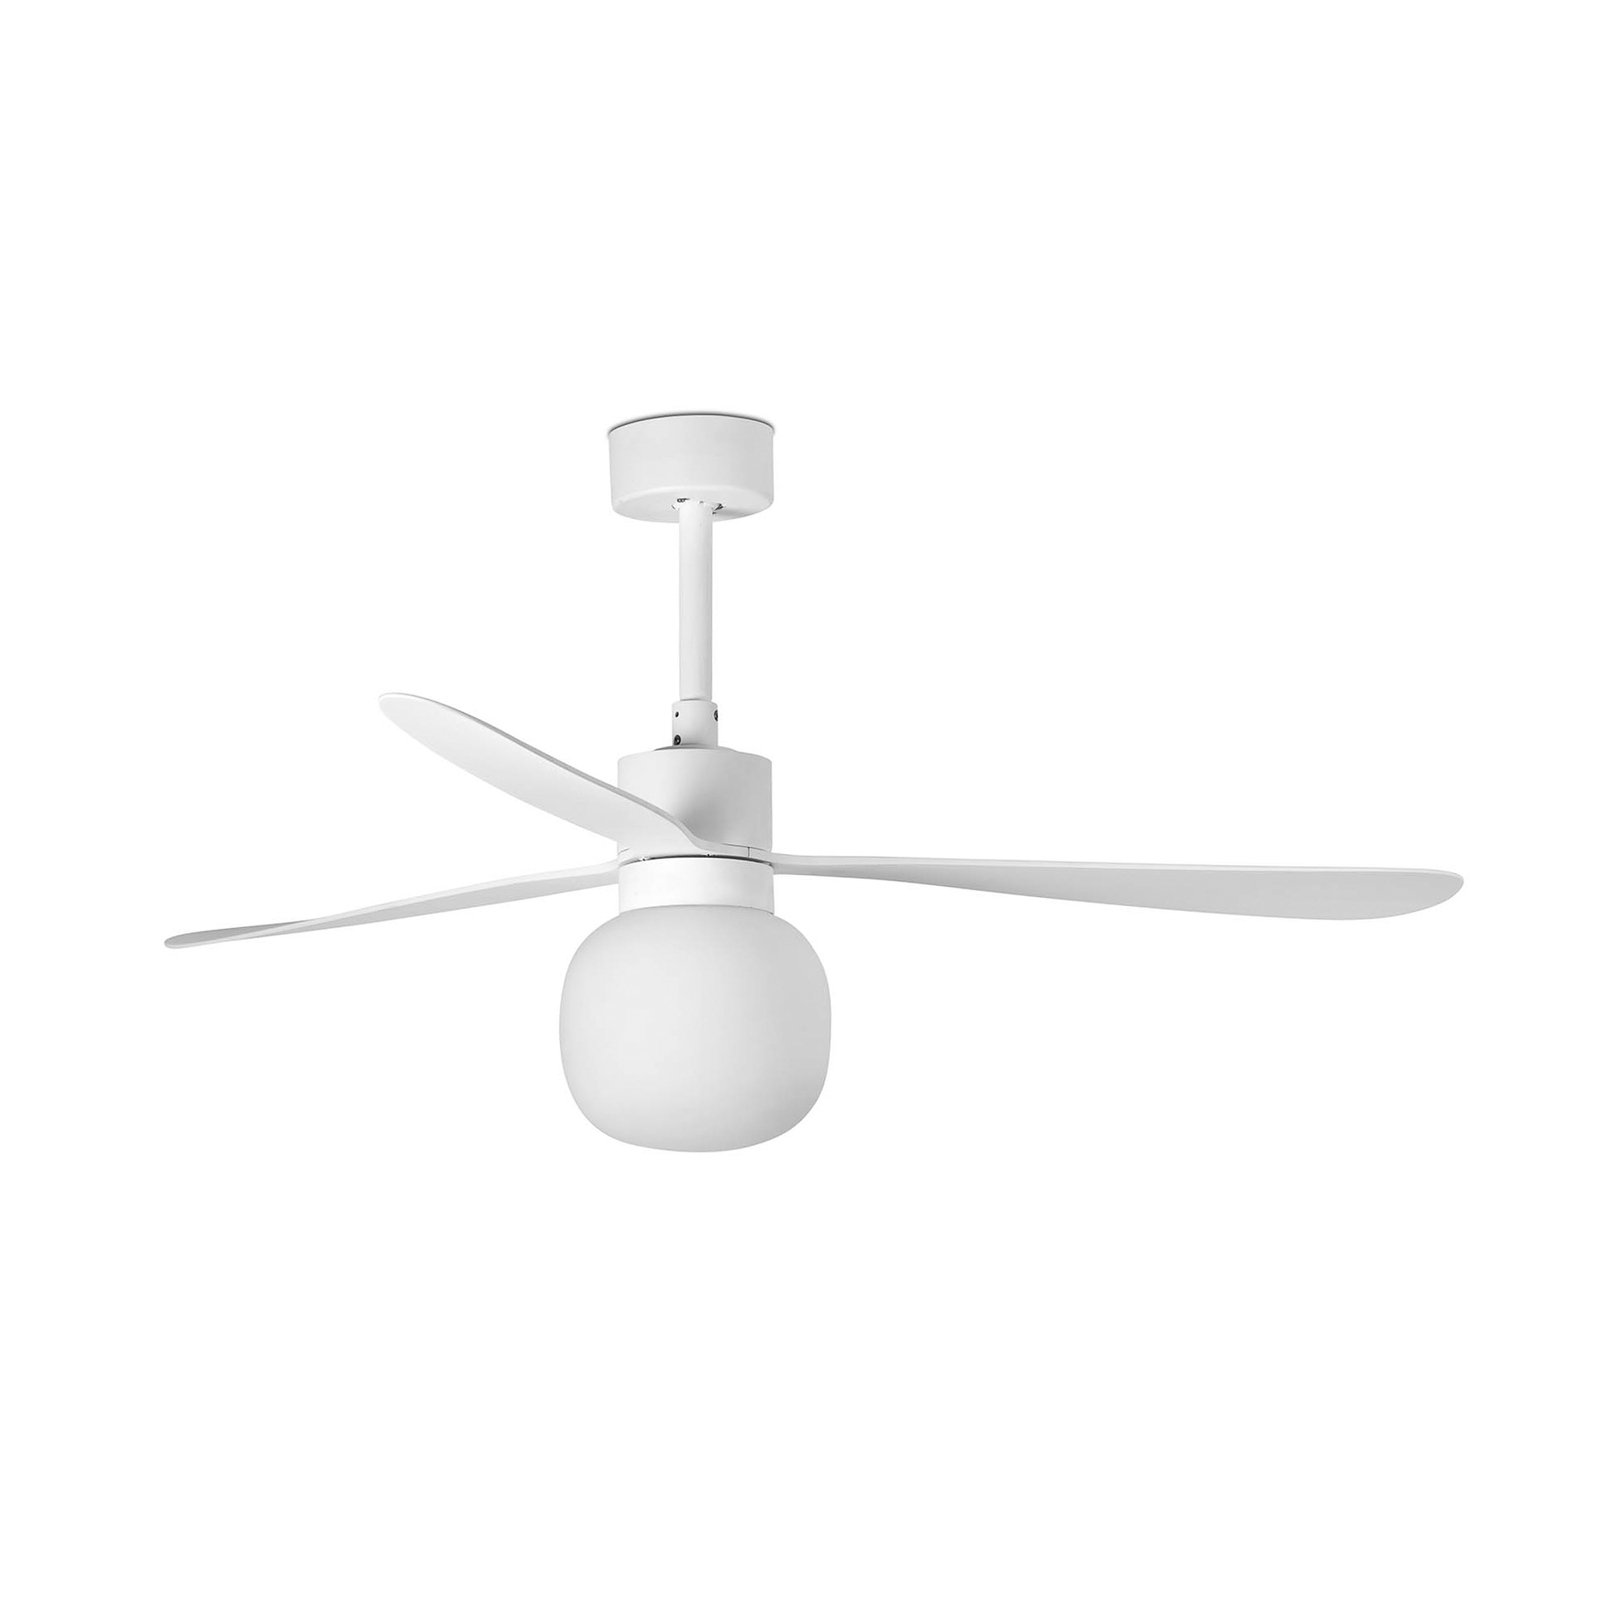 Amelia Ball ceiling fan with an LED light, white